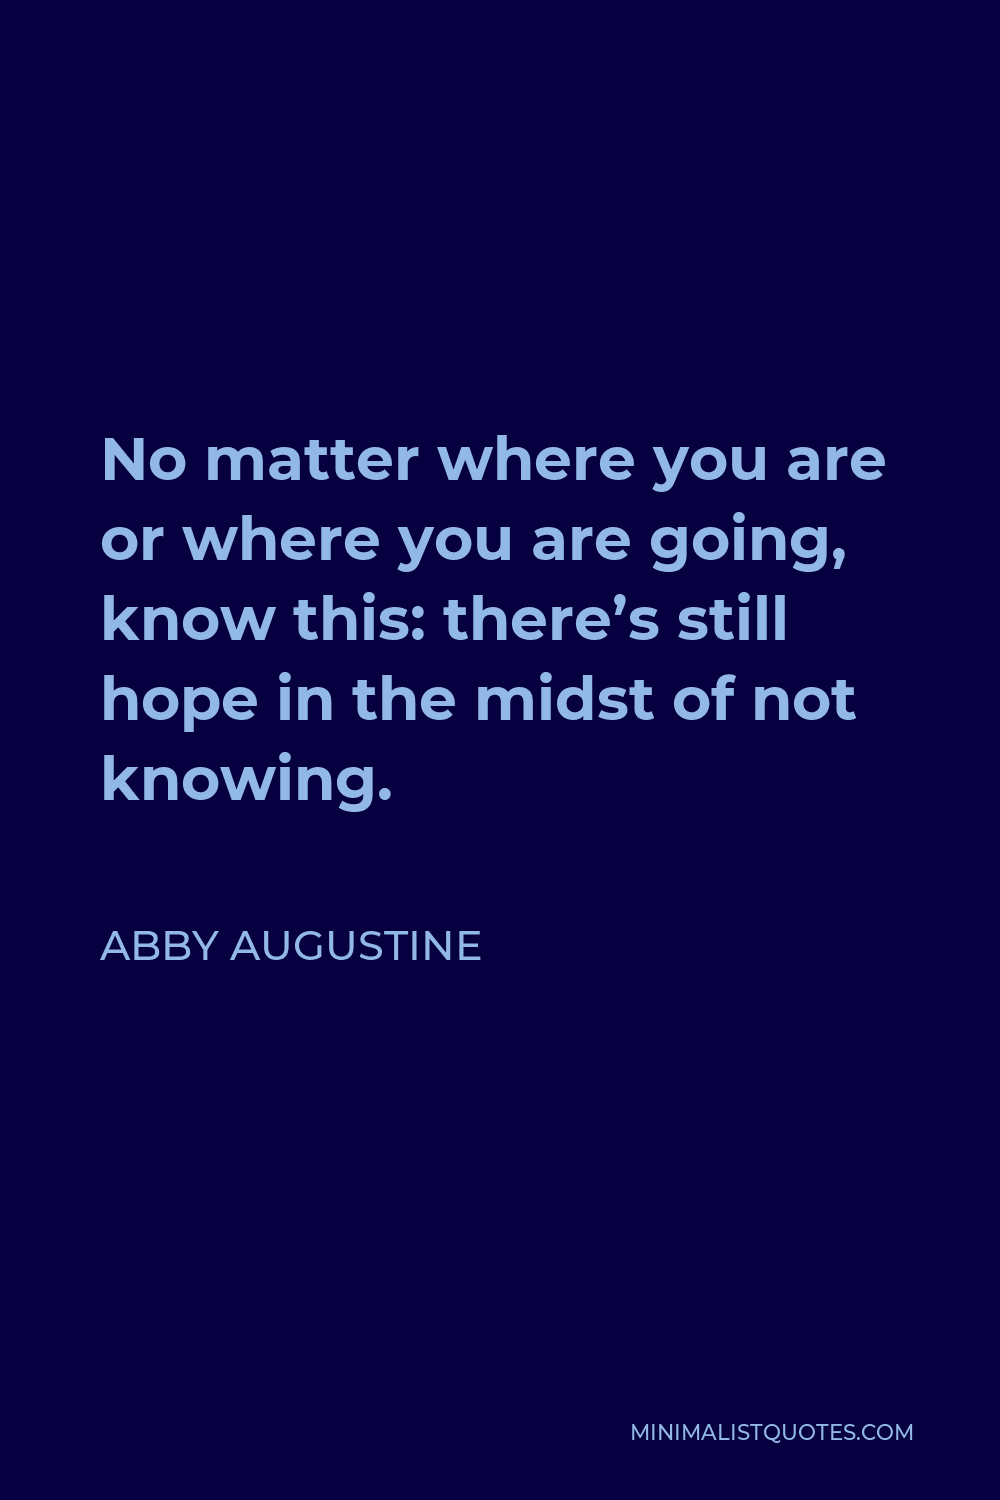 Abby Augustine Quote - No matter where you are or where you are going, know this: there’s still hope in the midst of not knowing.